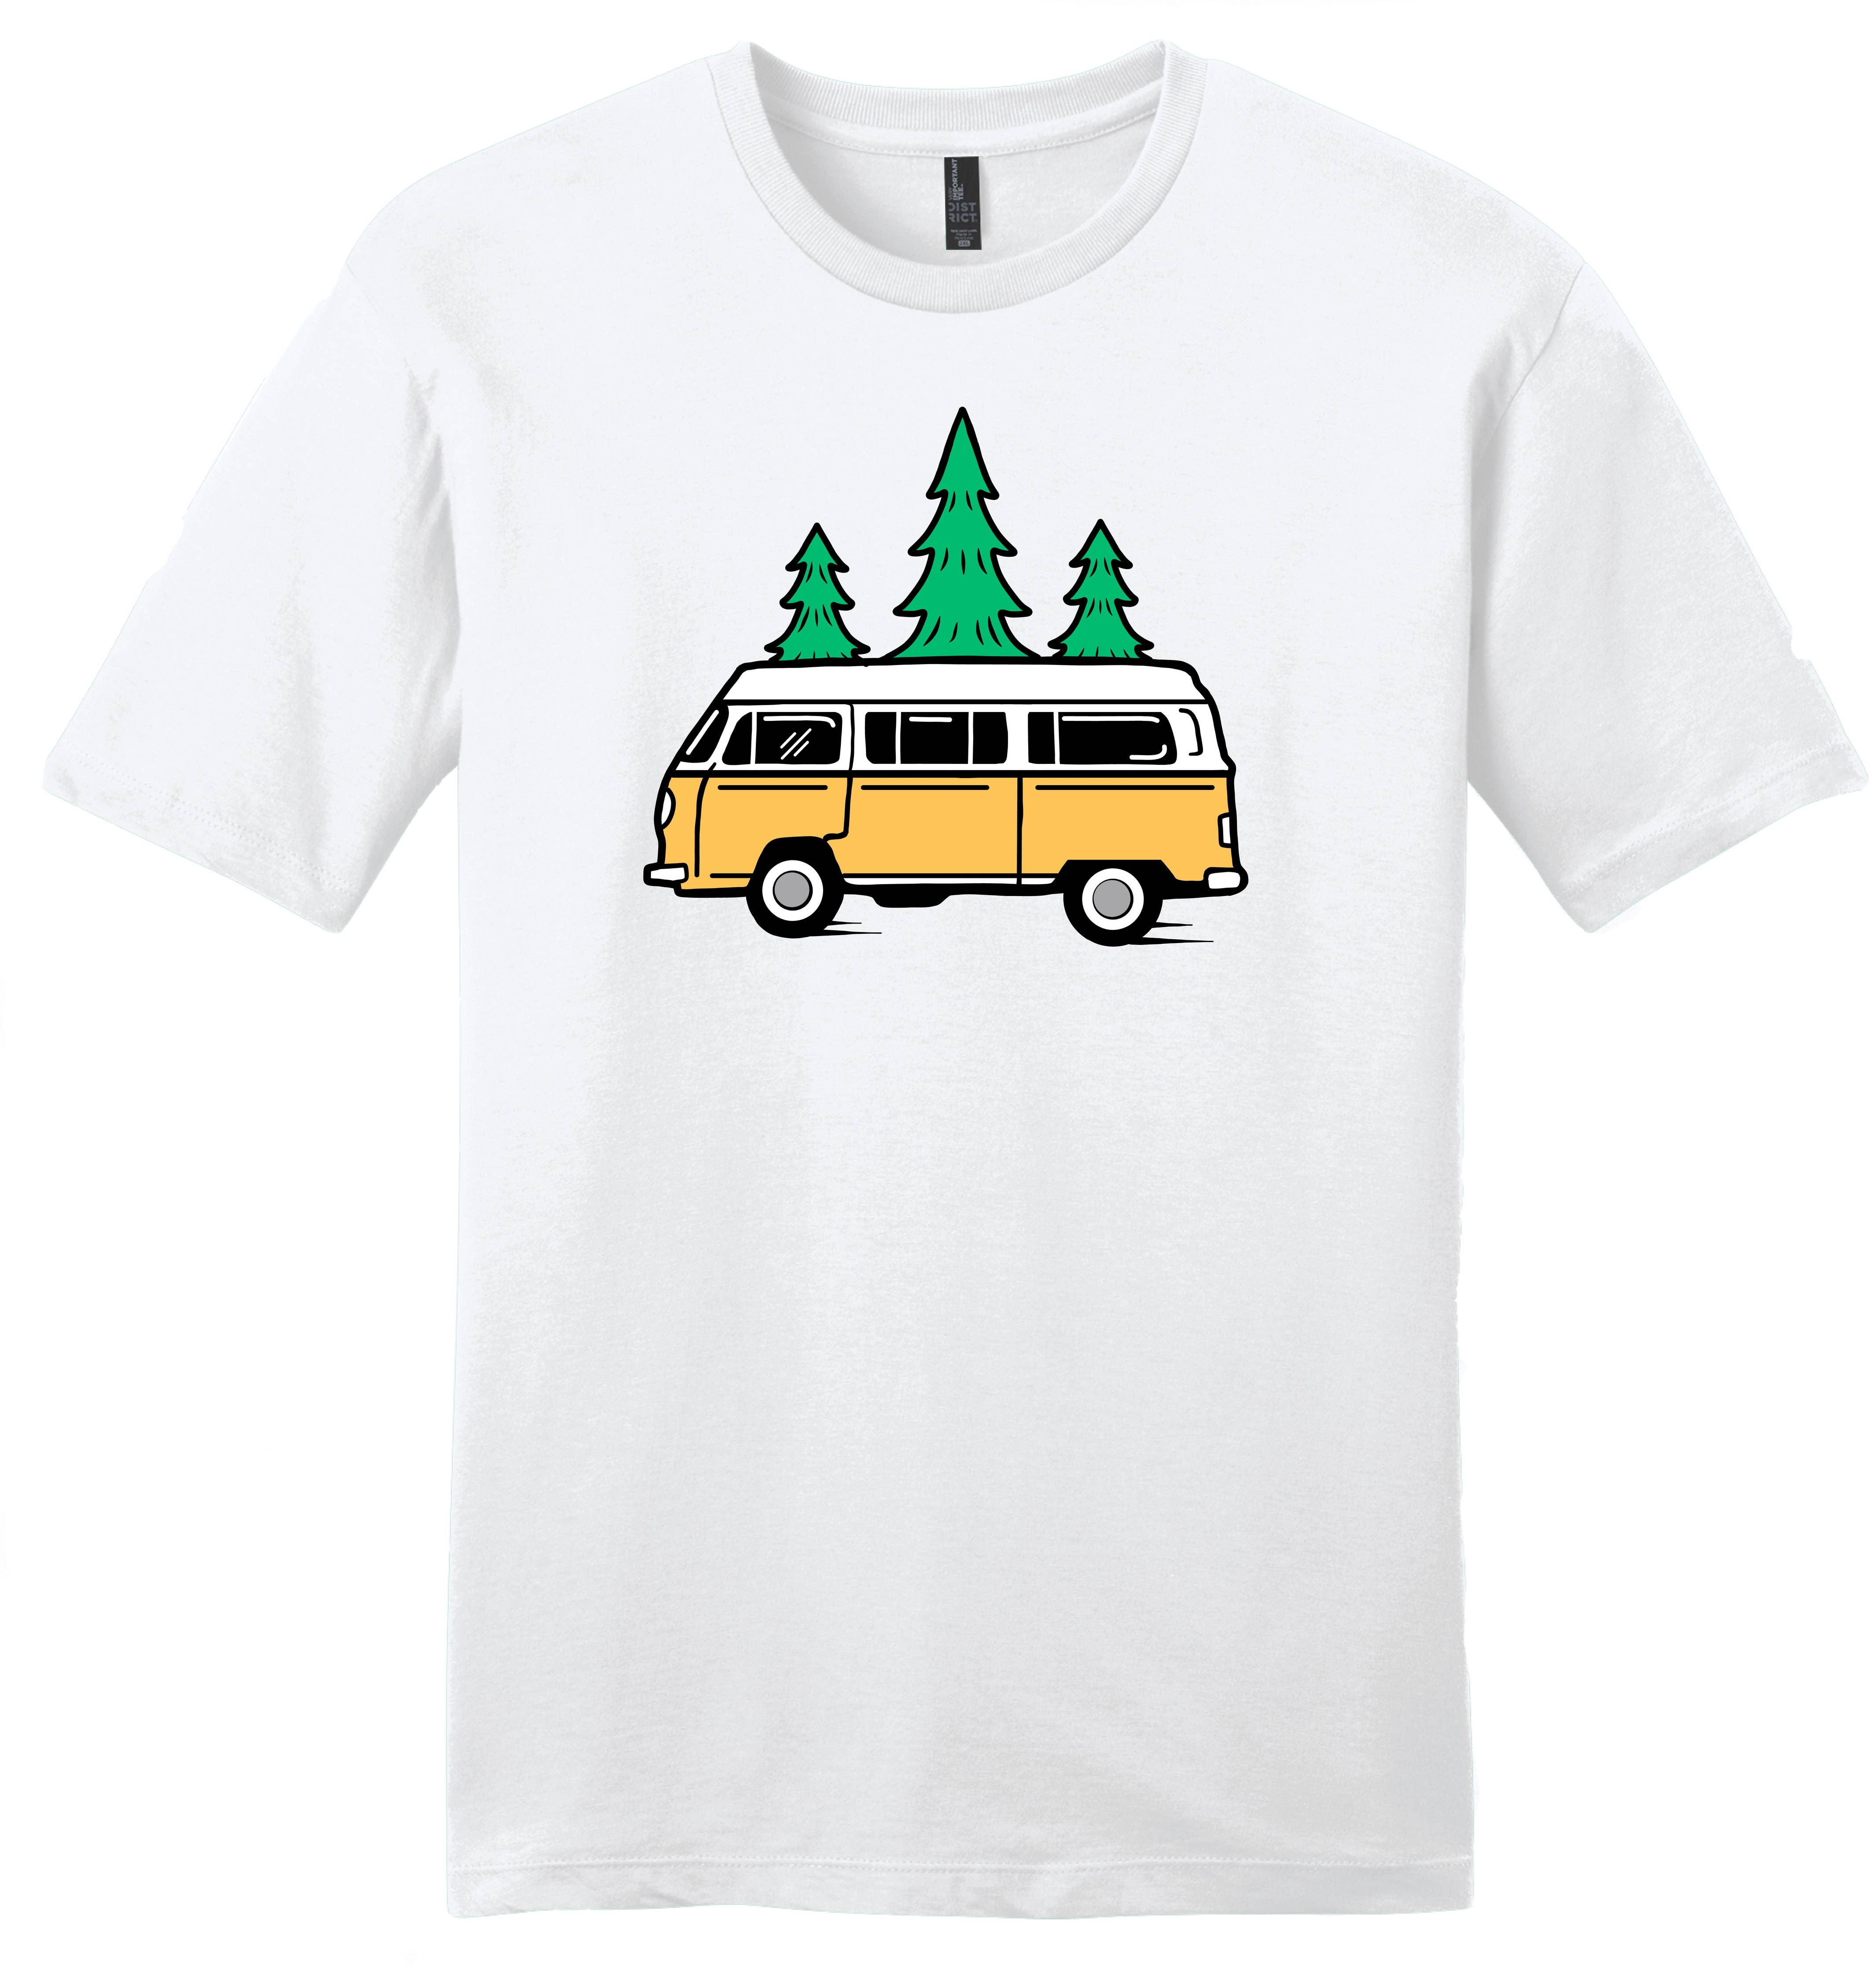 Bus and Trees Tee